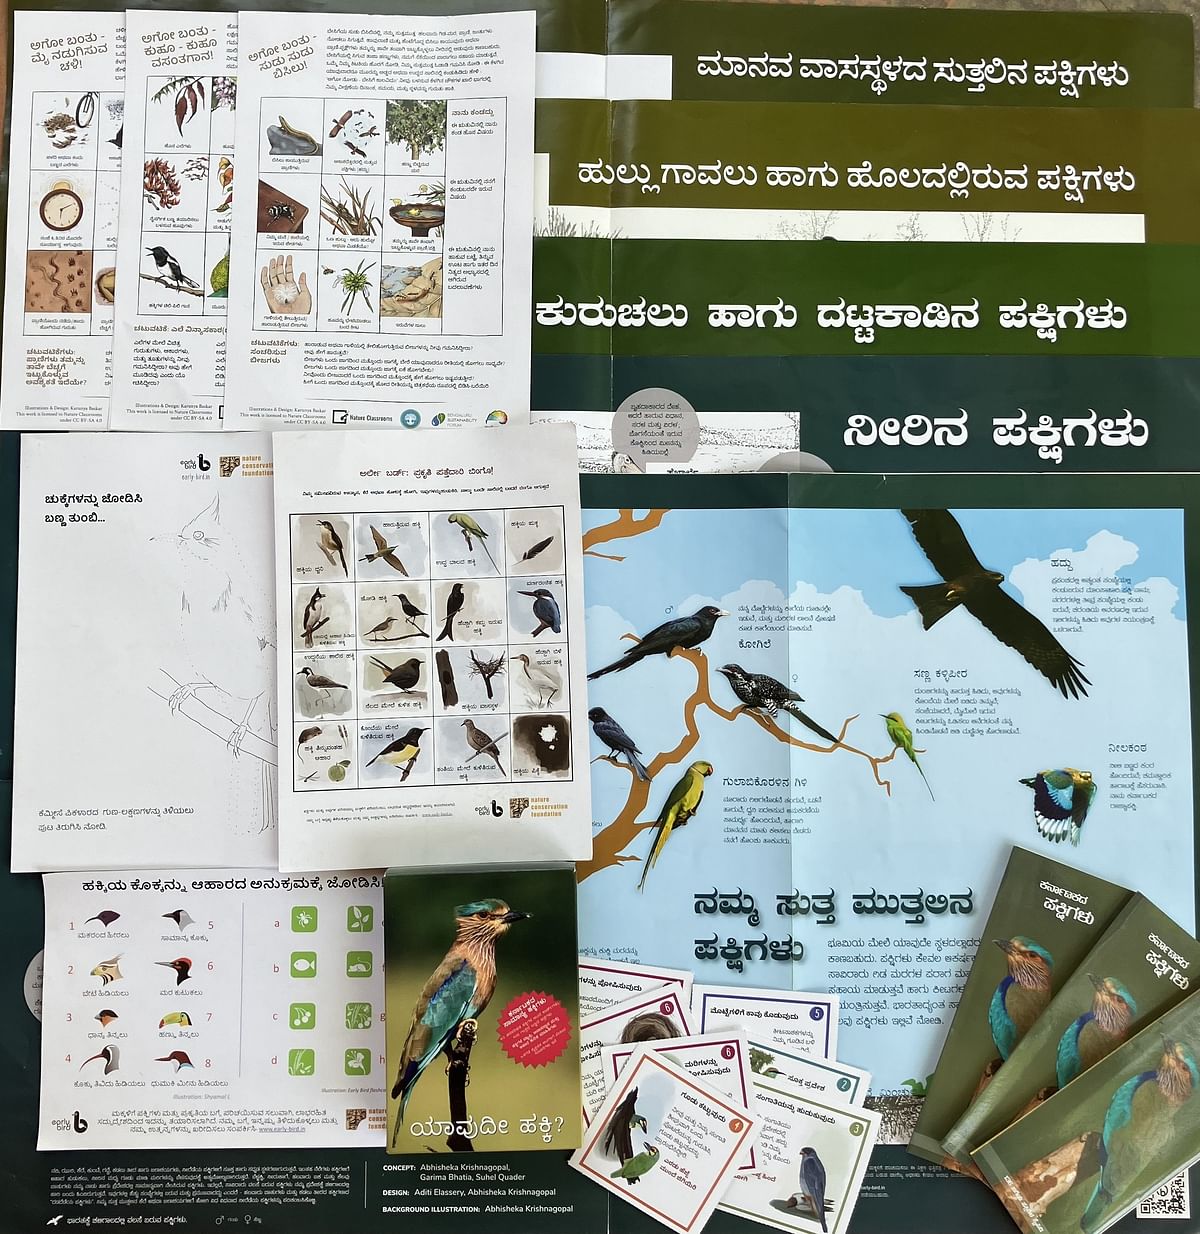 A brochure from a ‘Prakruthiya Pettige’ distributed to the libraries.